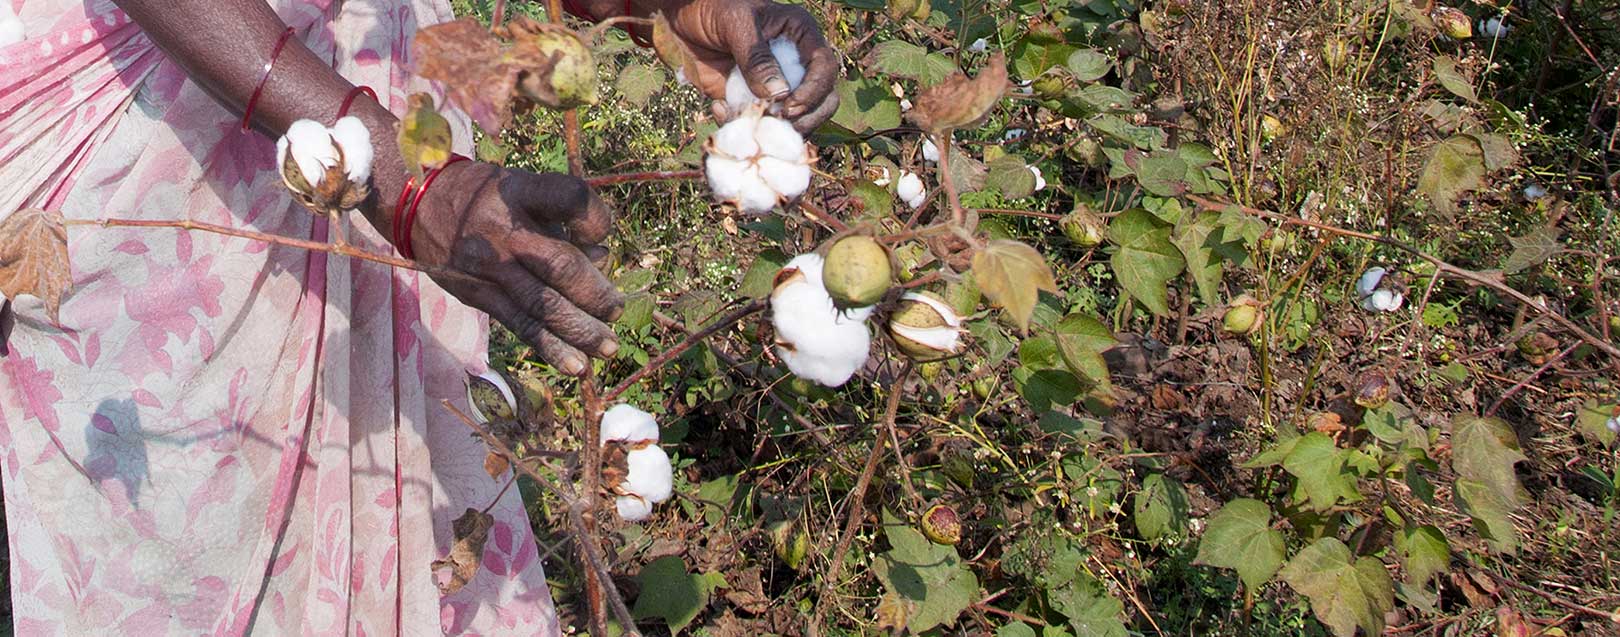 Cotton output could drop to 338 lakh bales in 2015-16